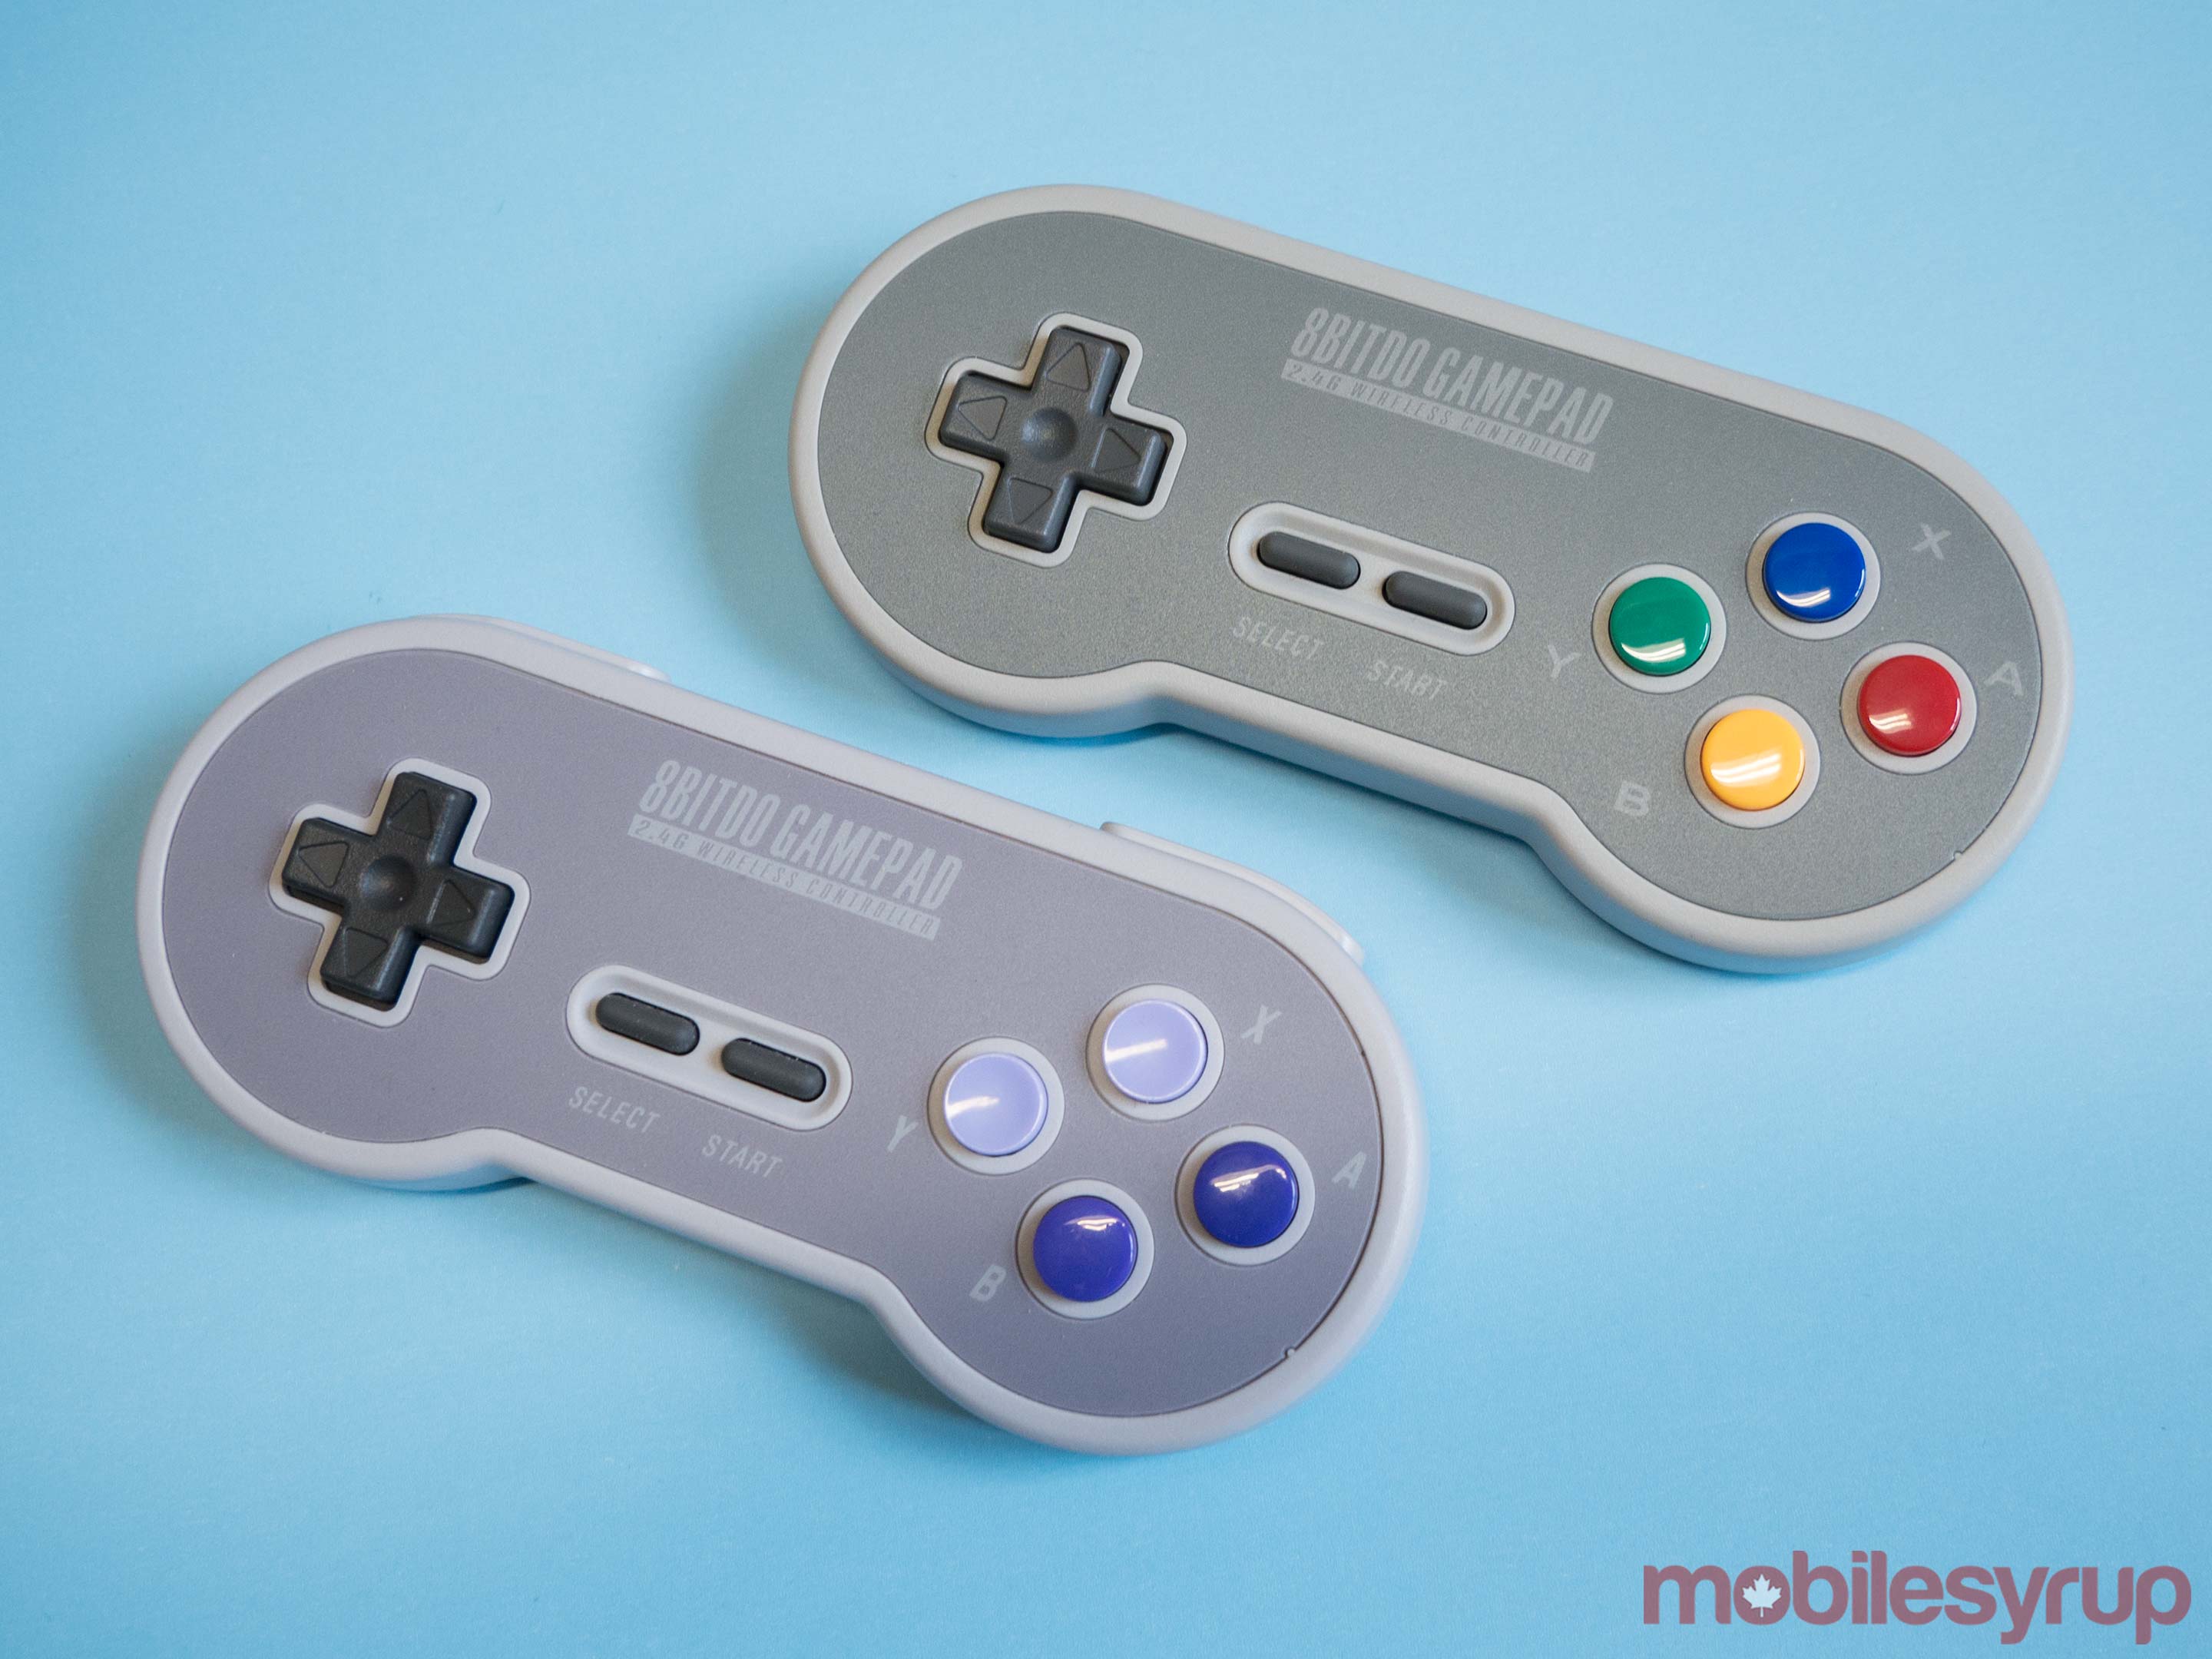 8bitdo's SN30 and SF30 controller